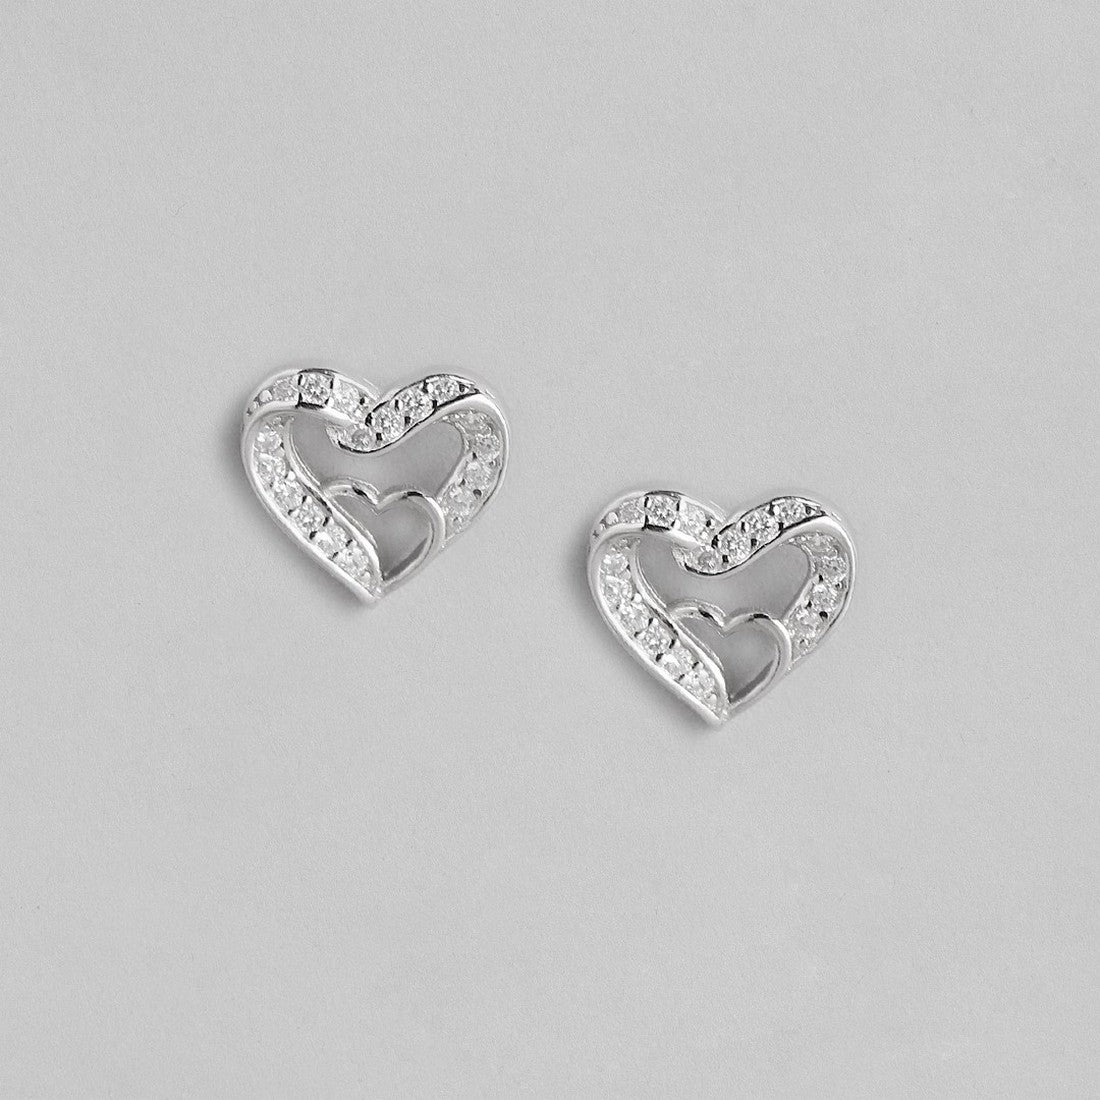 Saga of Entwined Hearts 925 Silver Jewellery Set